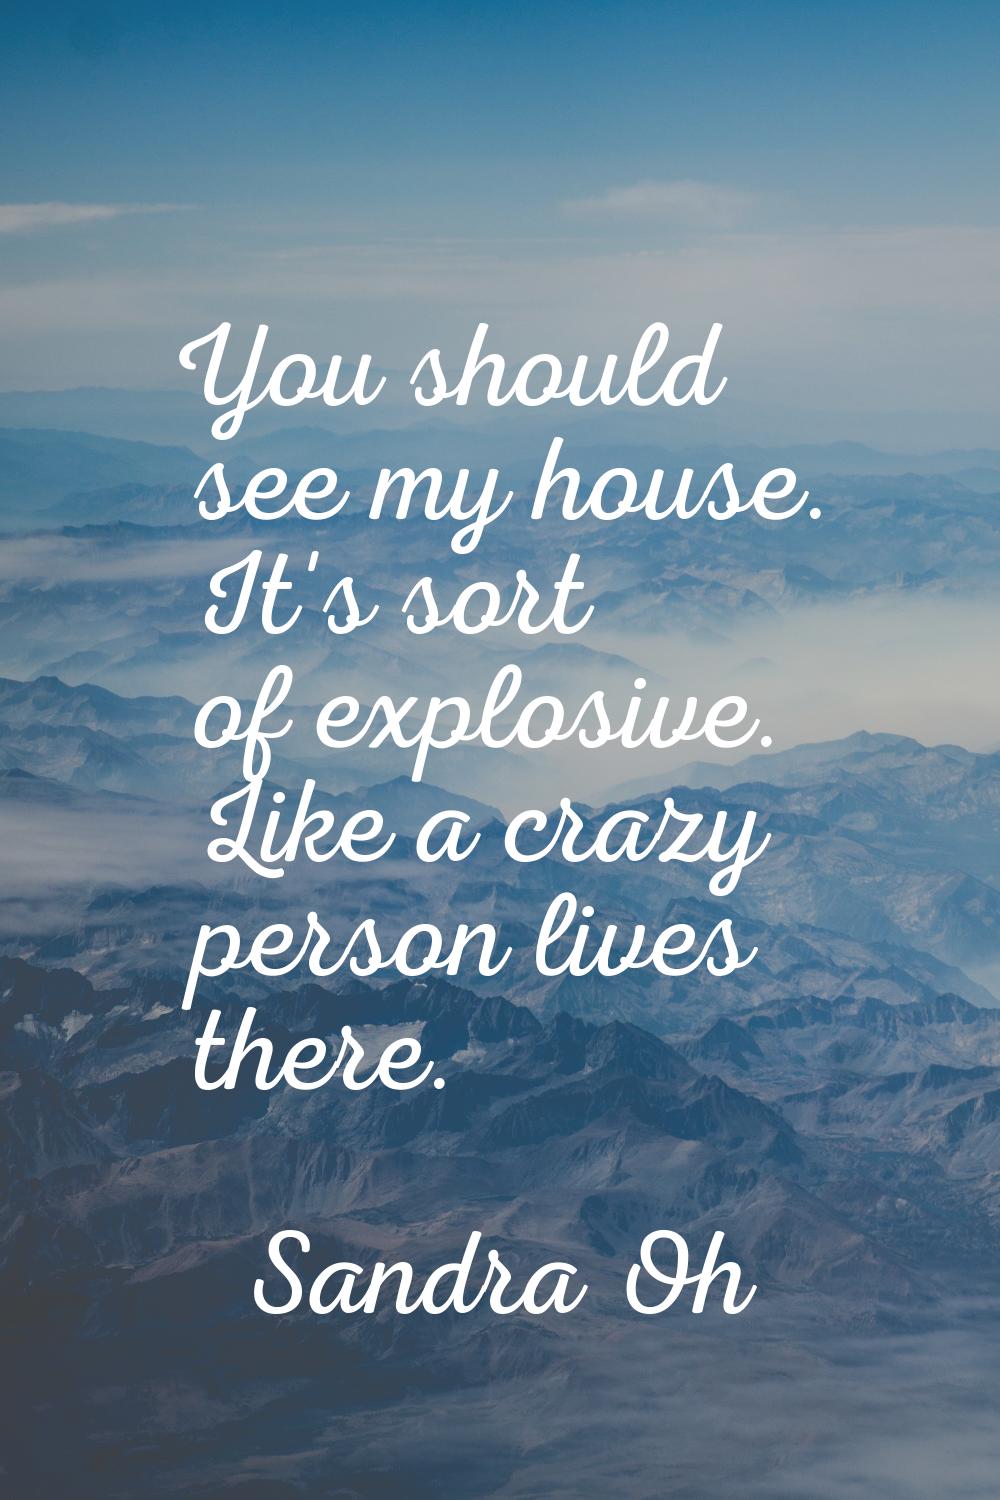 You should see my house. It's sort of explosive. Like a crazy person lives there.